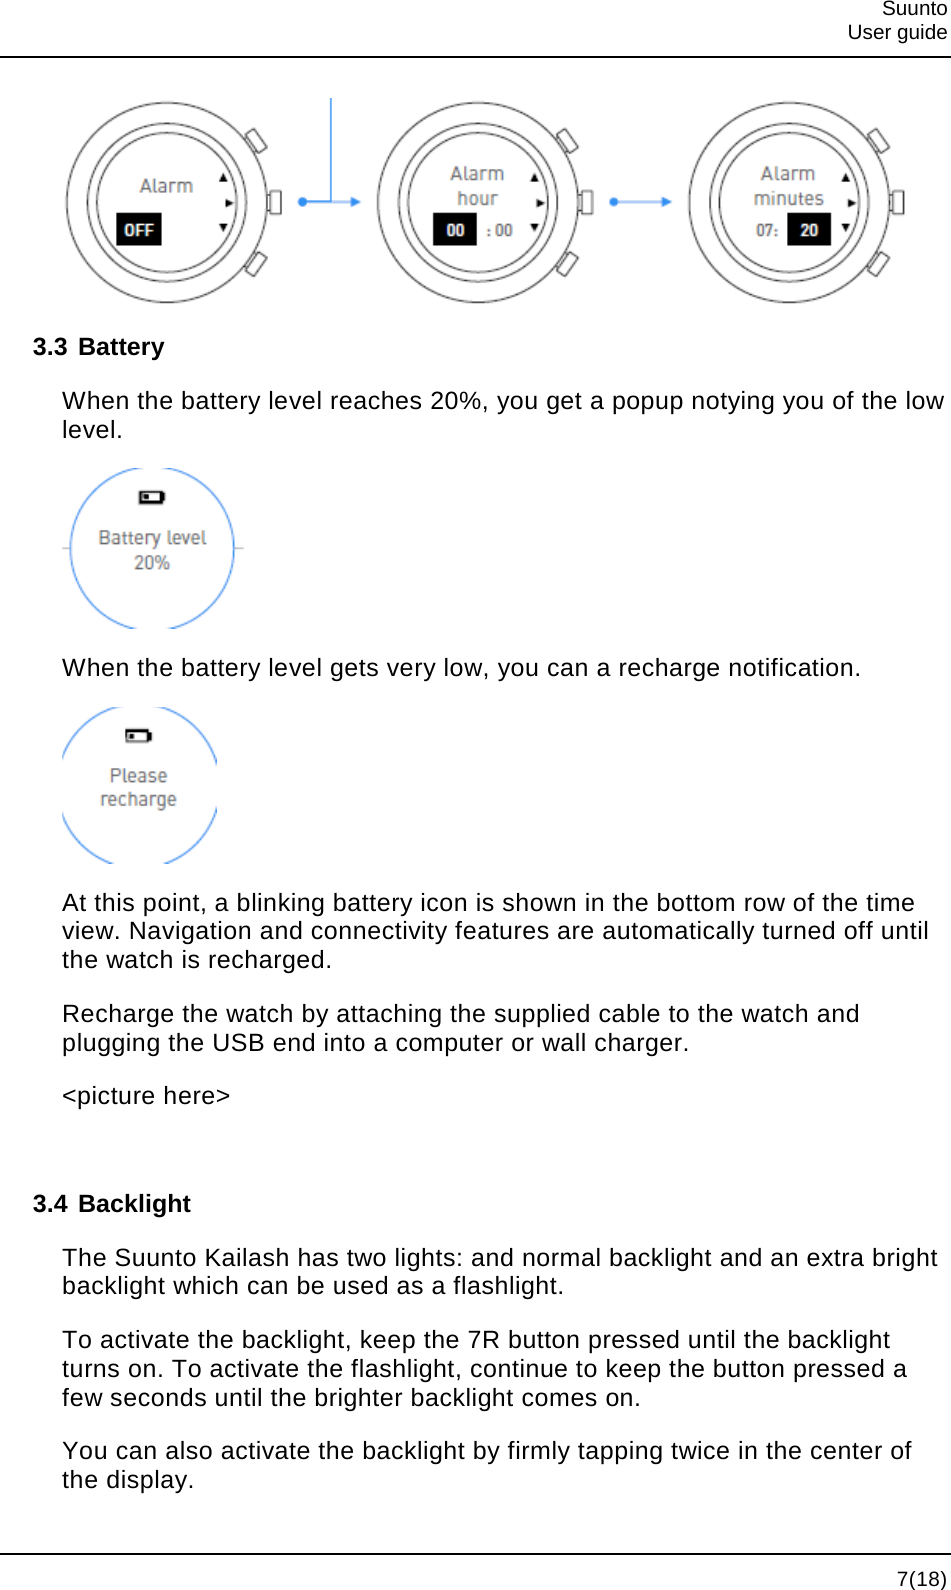  Suunto  User guide   7(18)  3.3 Battery When the battery level reaches 20%, you get a popup notying you of the low level.  When the battery level gets very low, you can a recharge notification.  At this point, a blinking battery icon is shown in the bottom row of the time view. Navigation and connectivity features are automatically turned off until the watch is recharged. Recharge the watch by attaching the supplied cable to the watch and plugging the USB end into a computer or wall charger. &lt;picture here&gt;  3.4 Backlight The Suunto Kailash has two lights: and normal backlight and an extra bright backlight which can be used as a flashlight. To activate the backlight, keep the 7R button pressed until the backlight turns on. To activate the flashlight, continue to keep the button pressed a few seconds until the brighter backlight comes on. You can also activate the backlight by firmly tapping twice in the center of the display. 